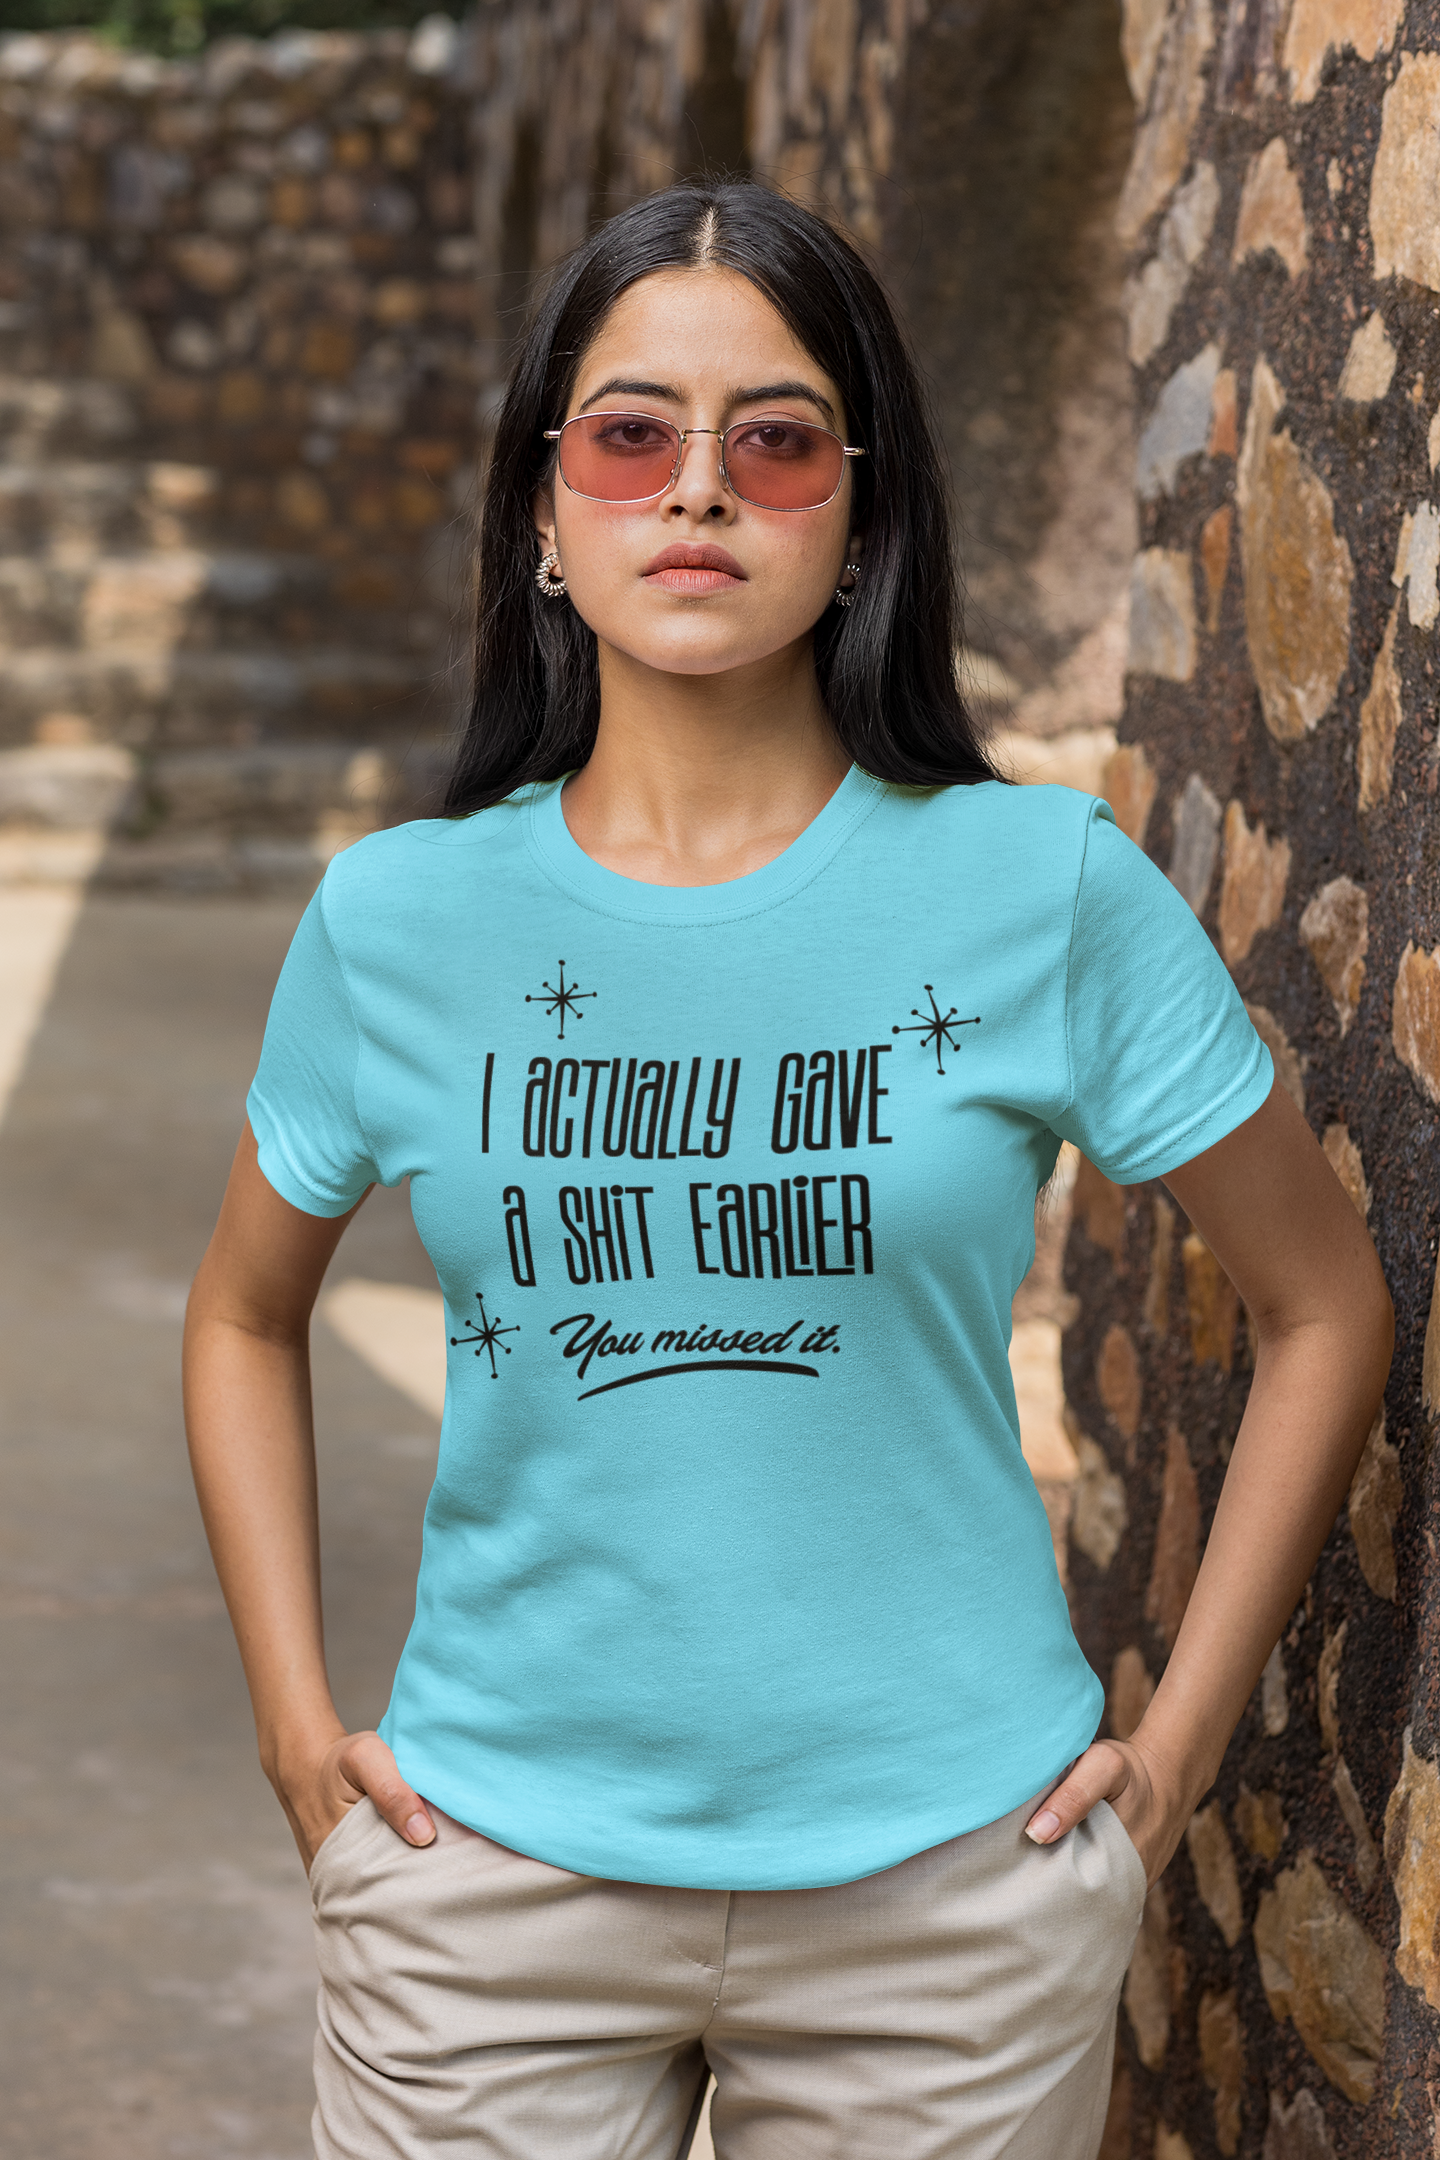 Missed It: Sassy Statement Tee for Those Who Actually Gave a Shit Earlier!